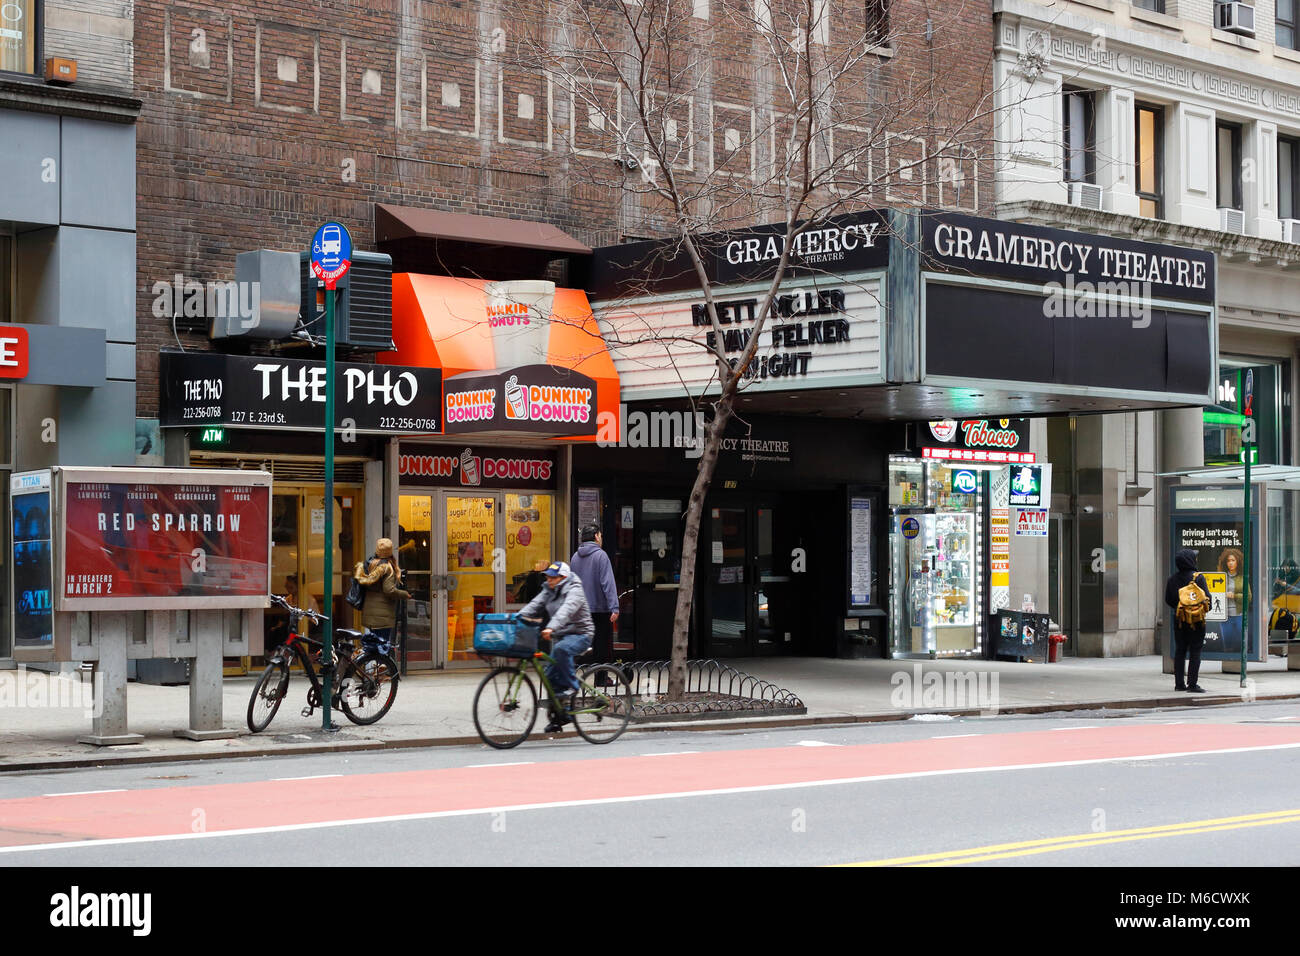 Gramercy Theater, 127 E 23rd St, New York, NY. exterior storefront of a theater in the Gramercy neighborhood of Manhattan. Stock Photo